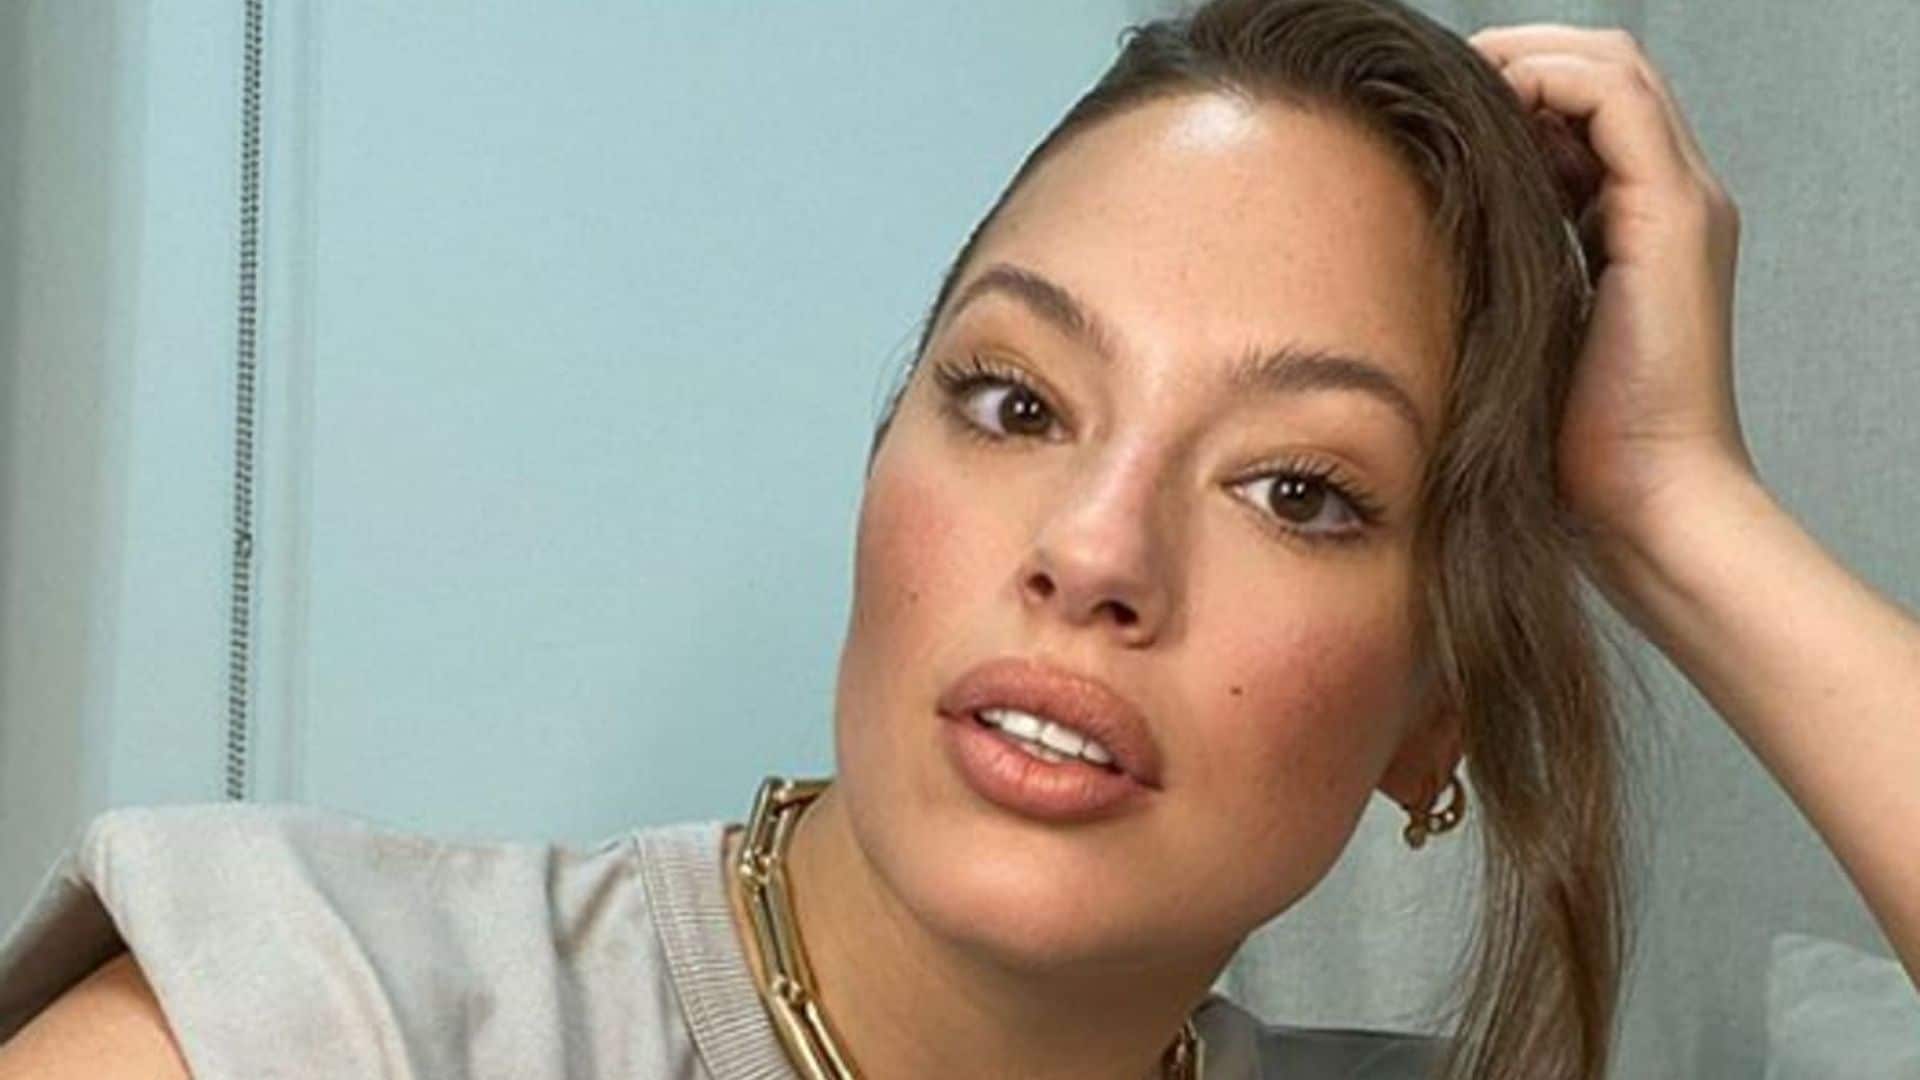 Ashley Graham bared it all in a daring yet empowering selfie